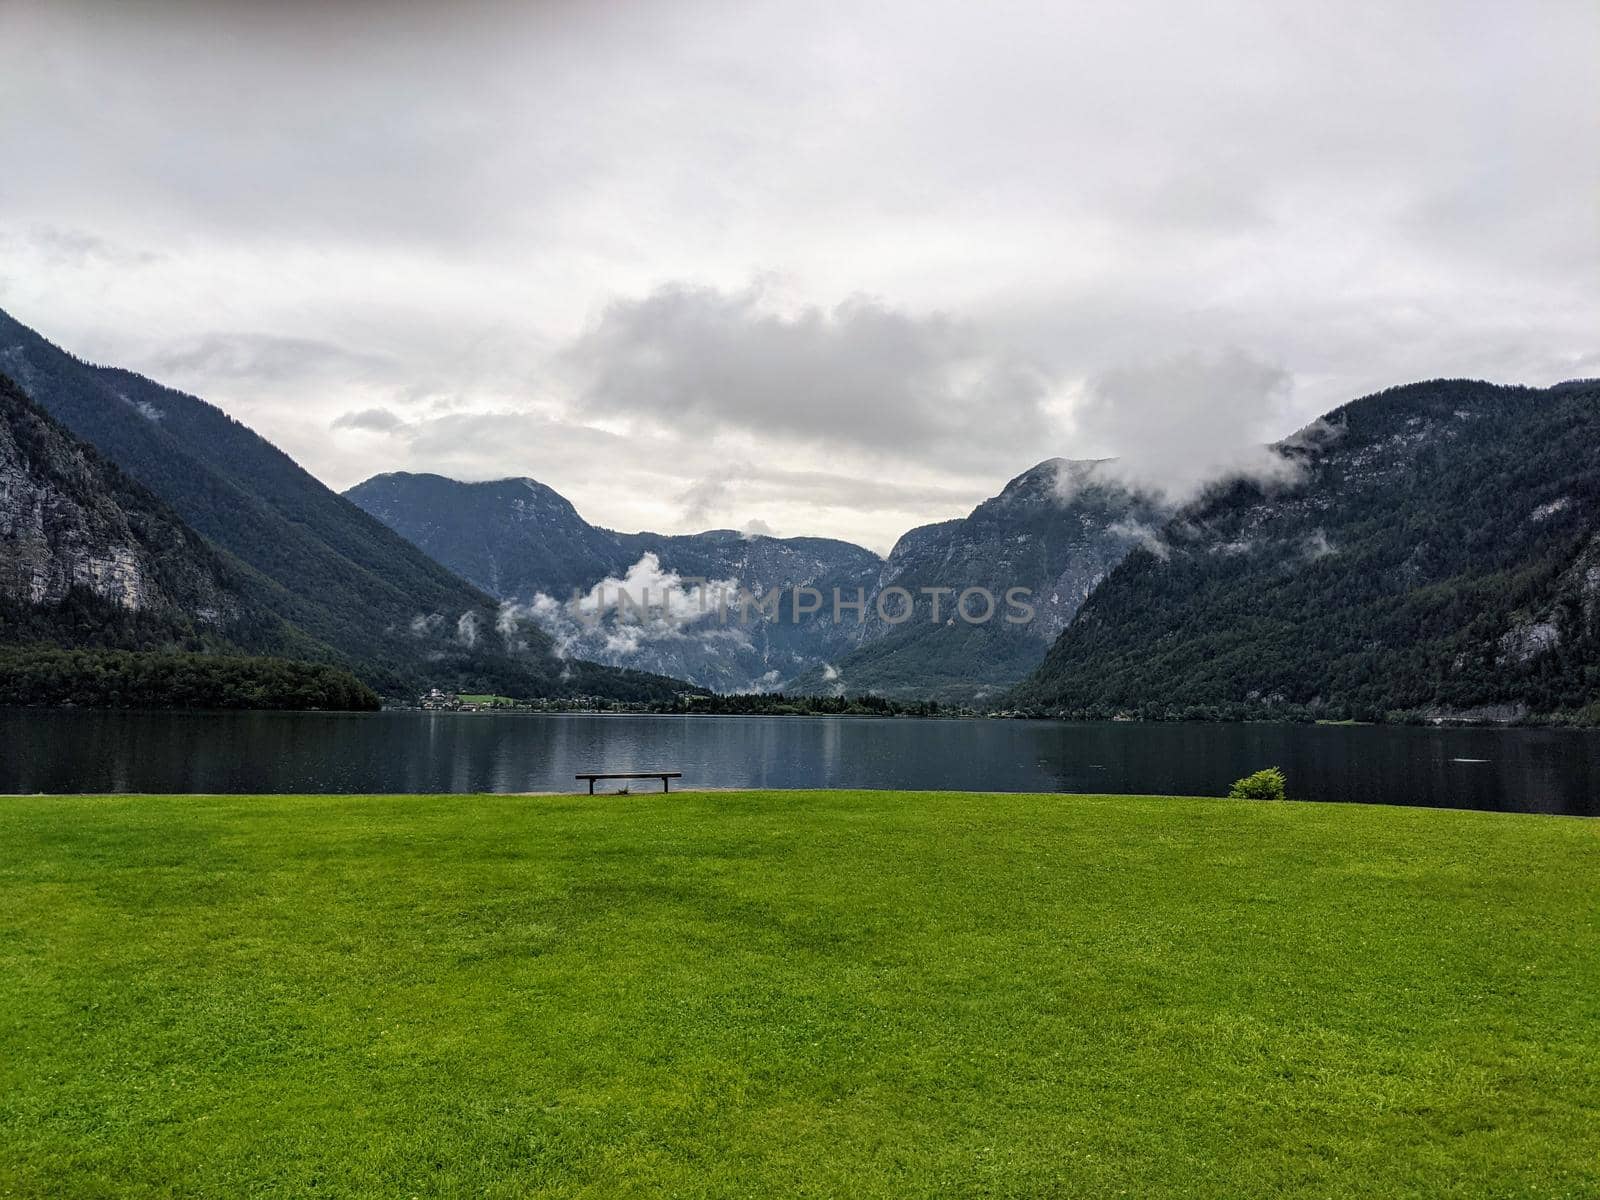 Alpine lake Hallstatter See during rain with a bench and green grass